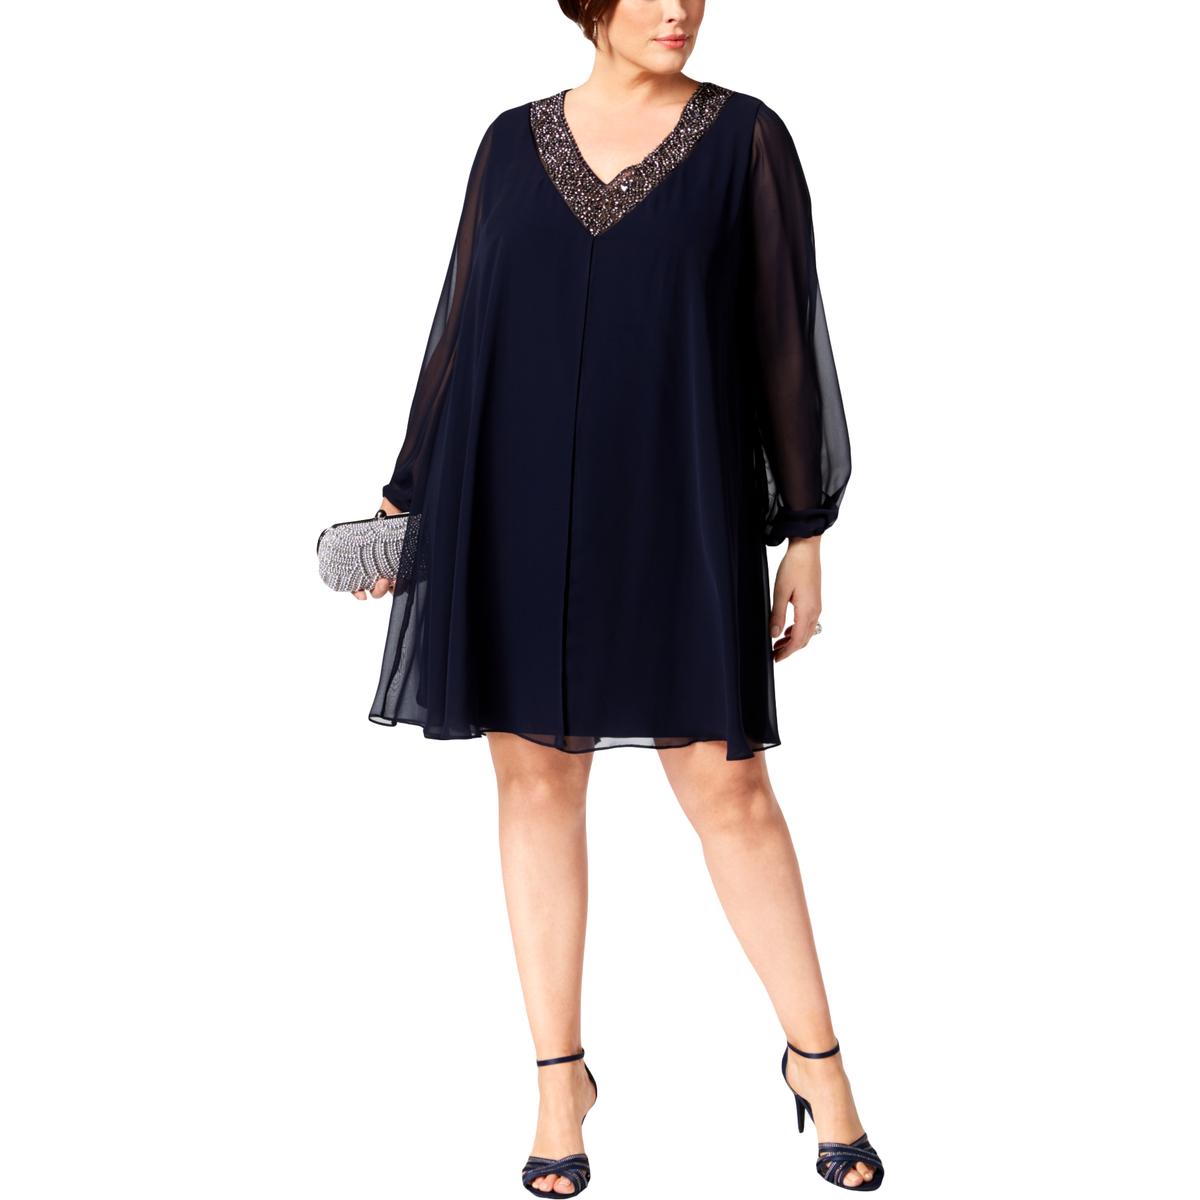 Betsy & Adam Womens Navy Beaded V-Neck Cocktail Party Dress Plus 18W ...